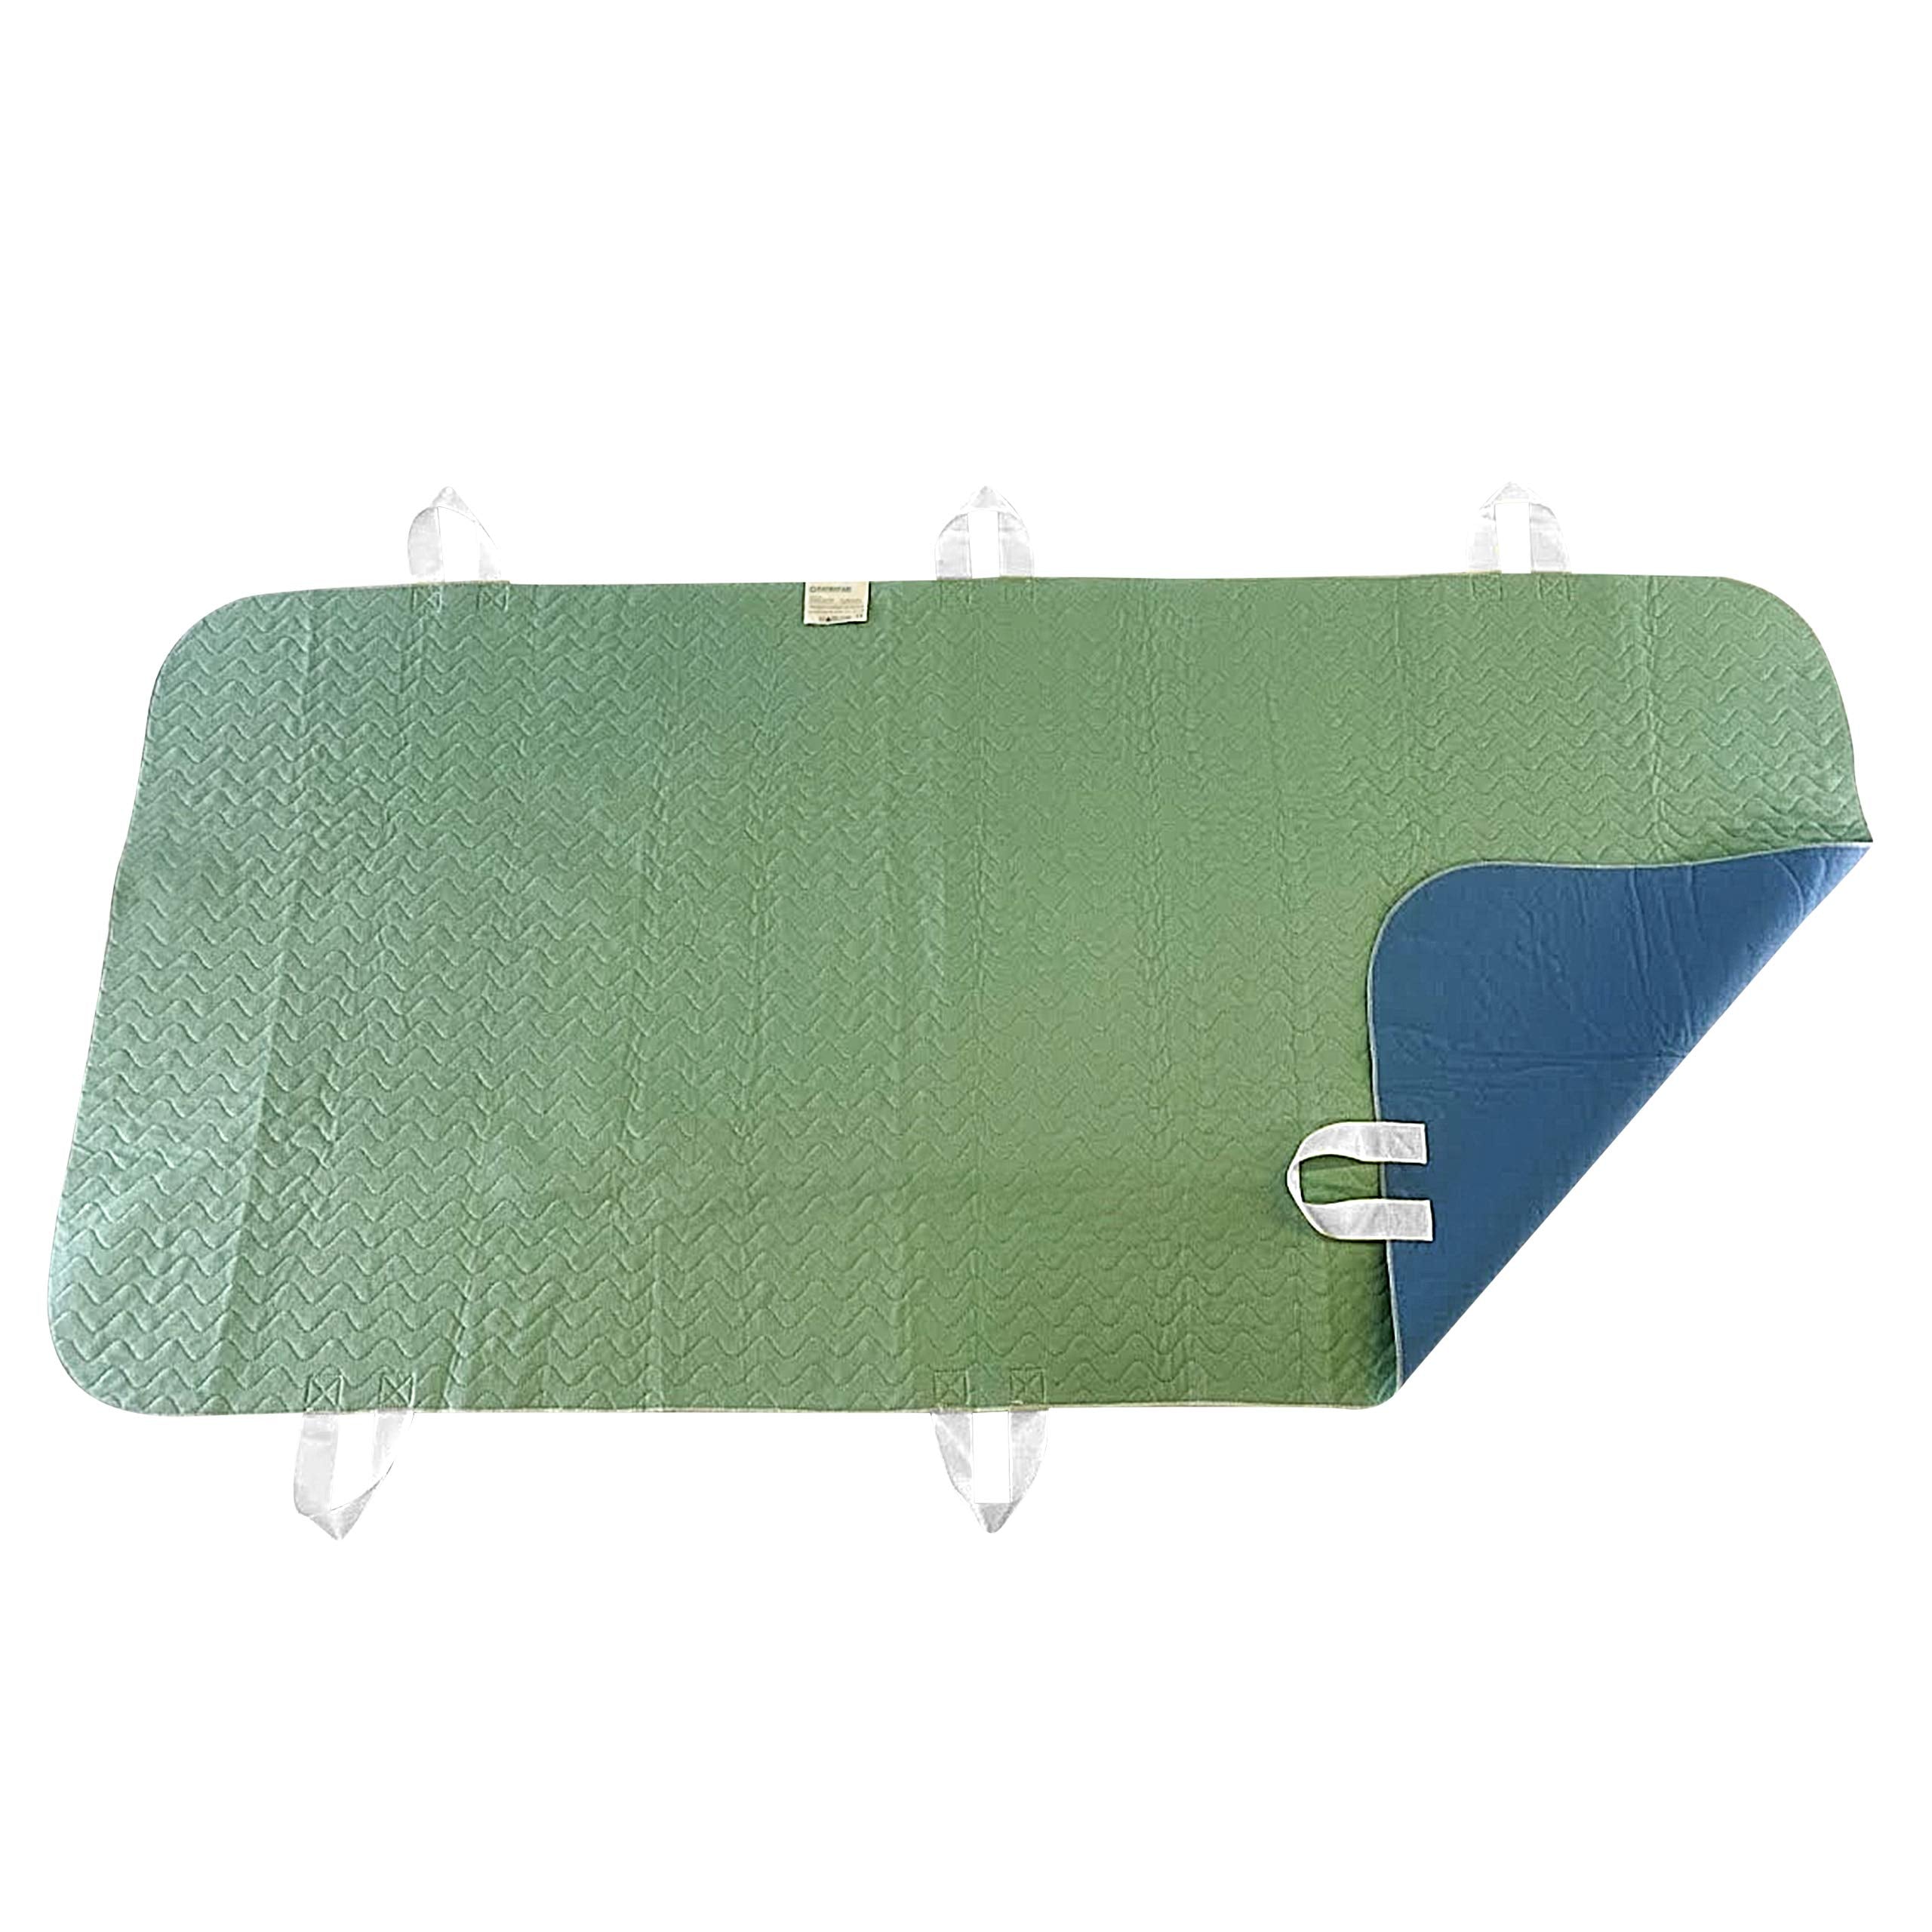 Washable and Reusable Positioning Bed Pad with Handles, Waterproof